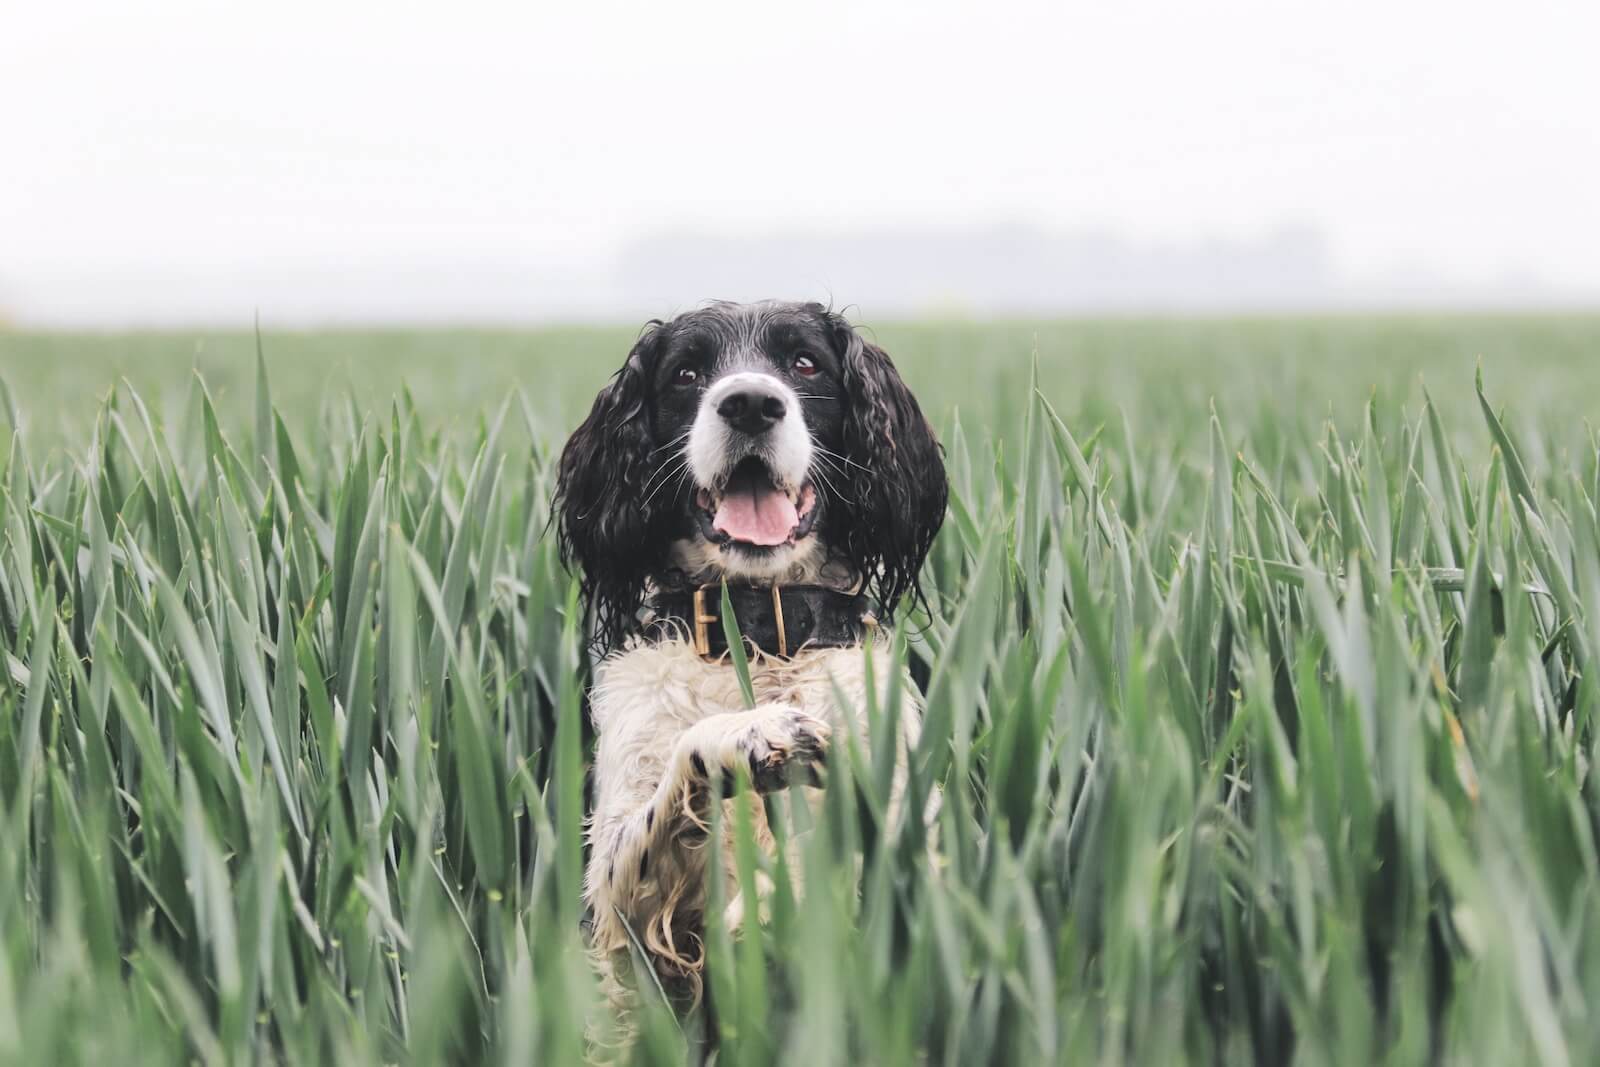 a black and white dog standing in a field of tall grass